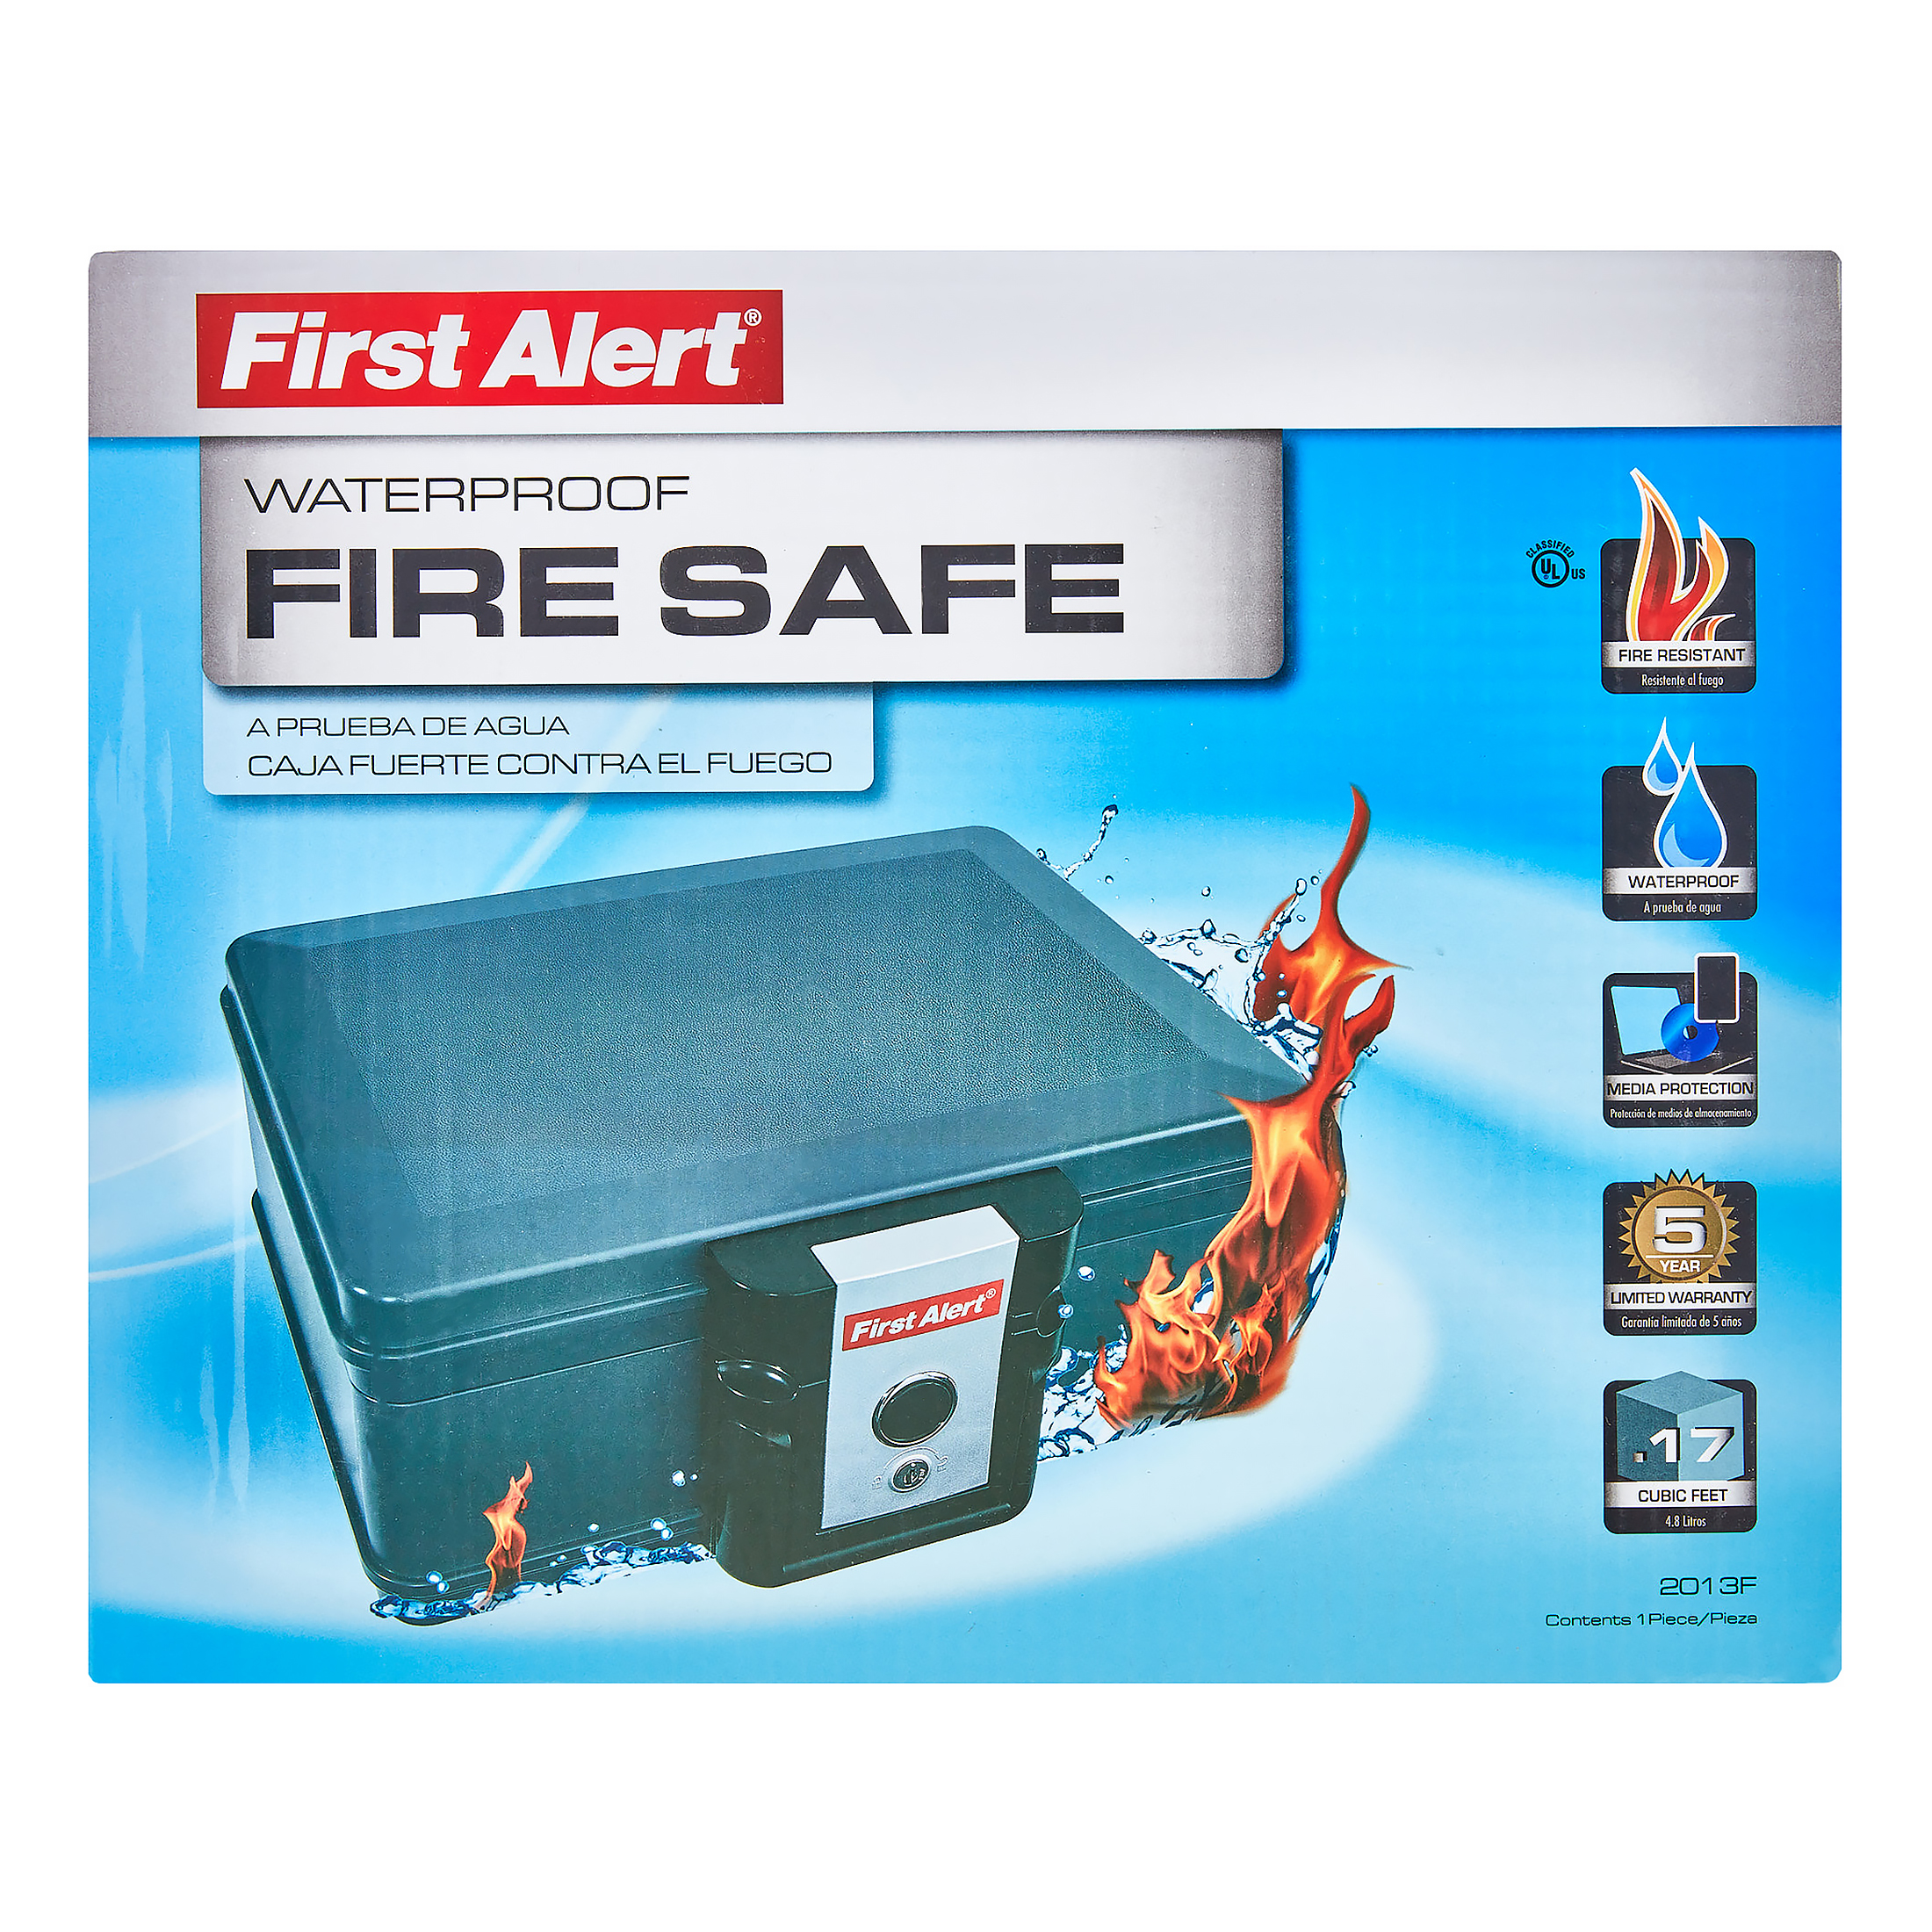 First Alert 2013F Water and Fire Protector File Chest, 0.17 Cubic Ft. - image 1 of 5